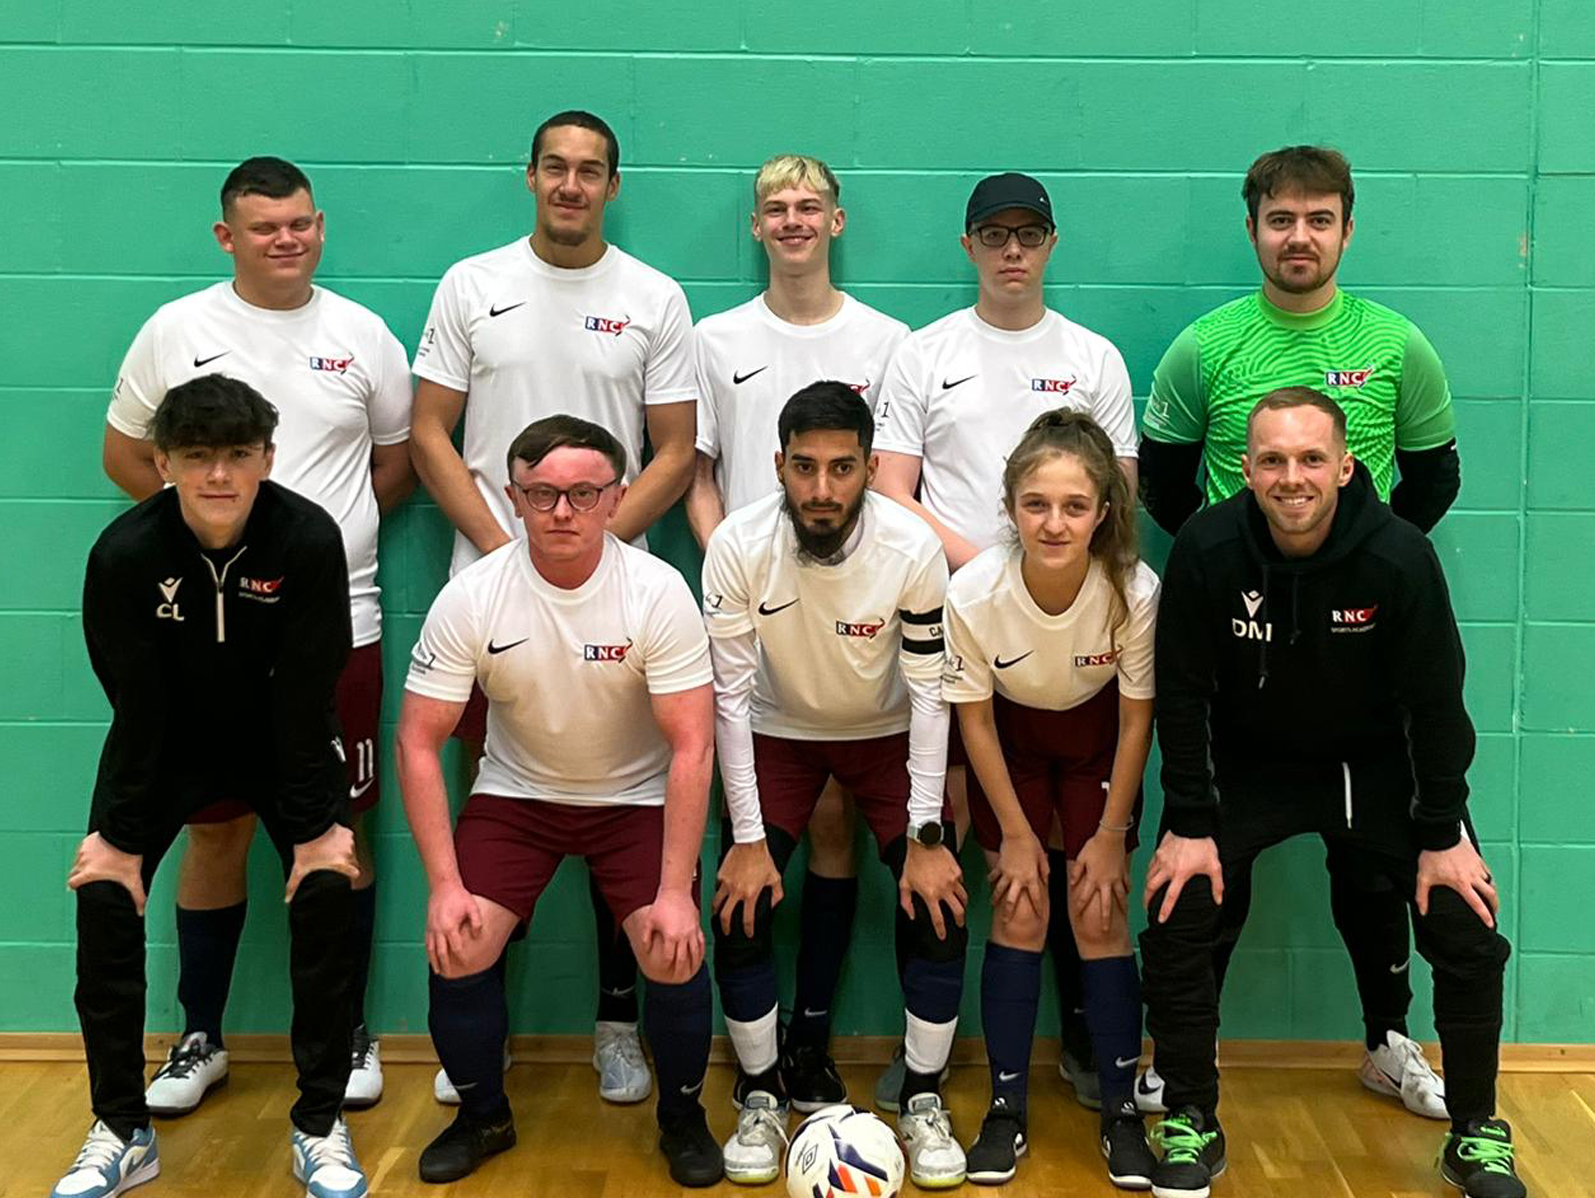 RNC's Partially Sighted Football Team and Coaching staff are pictured. Back row from L-R: Kyron, Ryley, Bobbie-Jack, George and Mike Front row from L-R: Callum, Conna, Murts, Sienna and Dylan